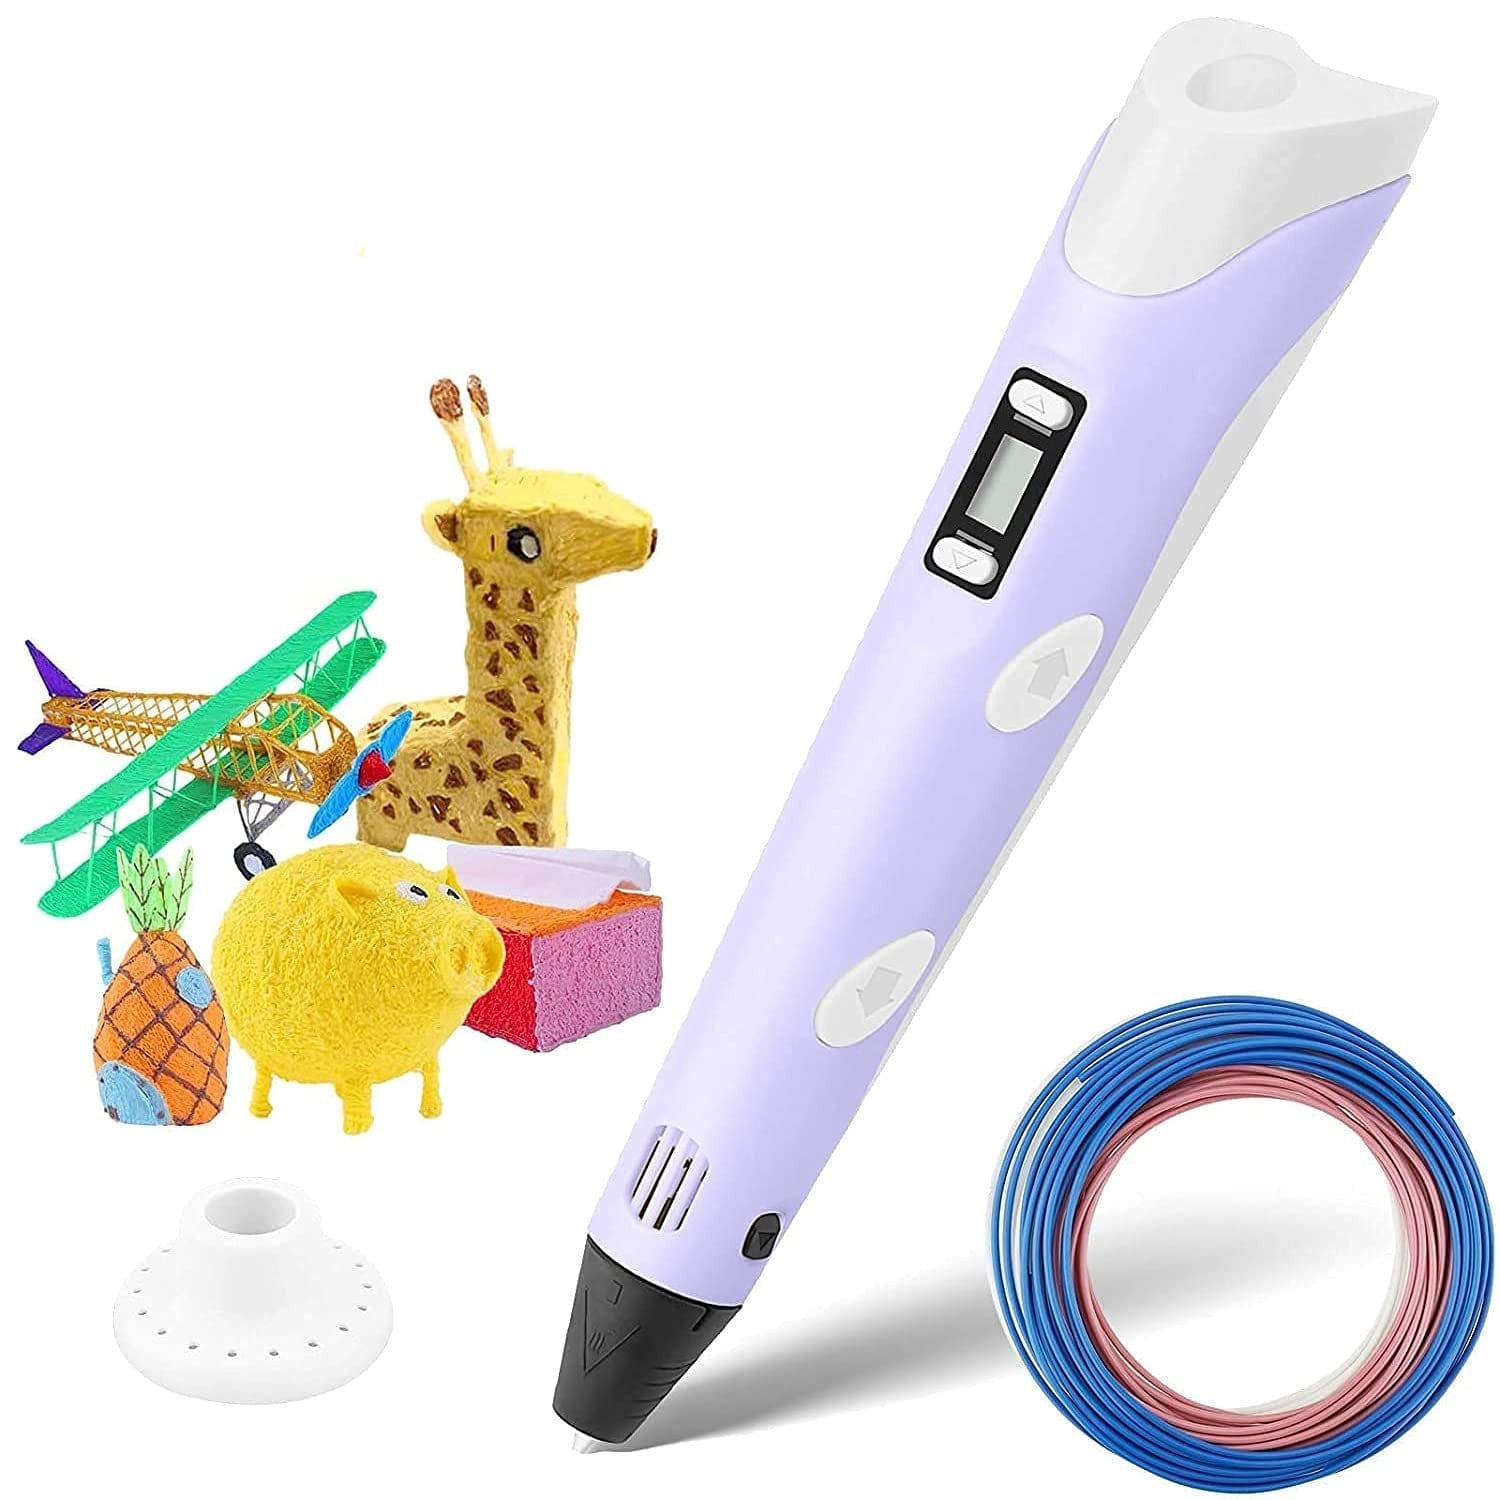 3D Pen for Kids, Parner 3D Art Pen Kit with LCD Display, Stylo 3D Printing  Drawing Pen, Easy Safe Creative 3D Doodler Writing Printer Gift Toys for  Kids Adults, Include 16 Colors